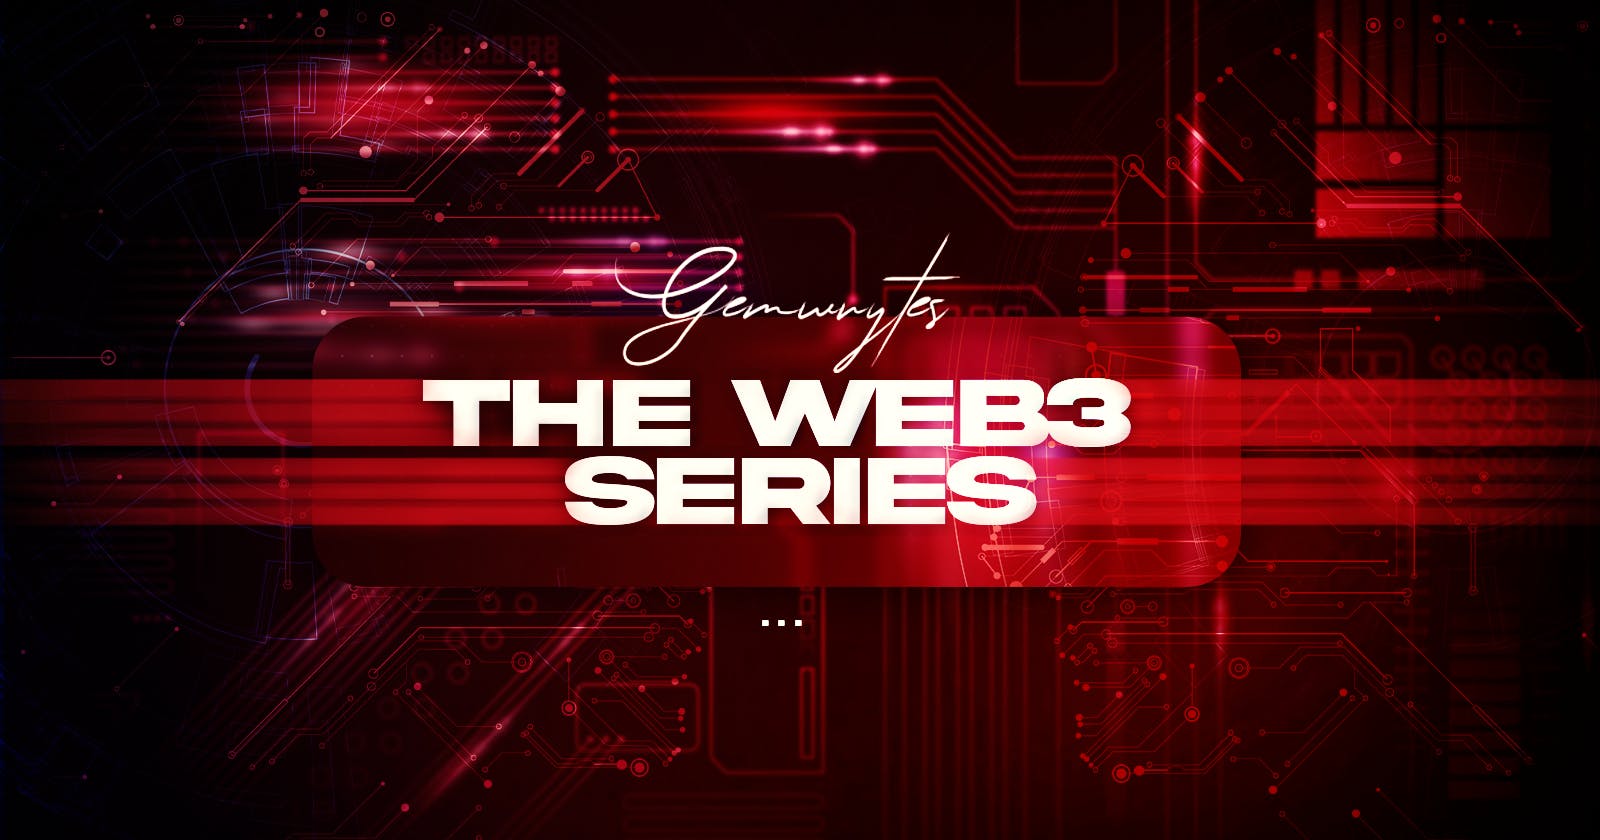 The Web 3 Series